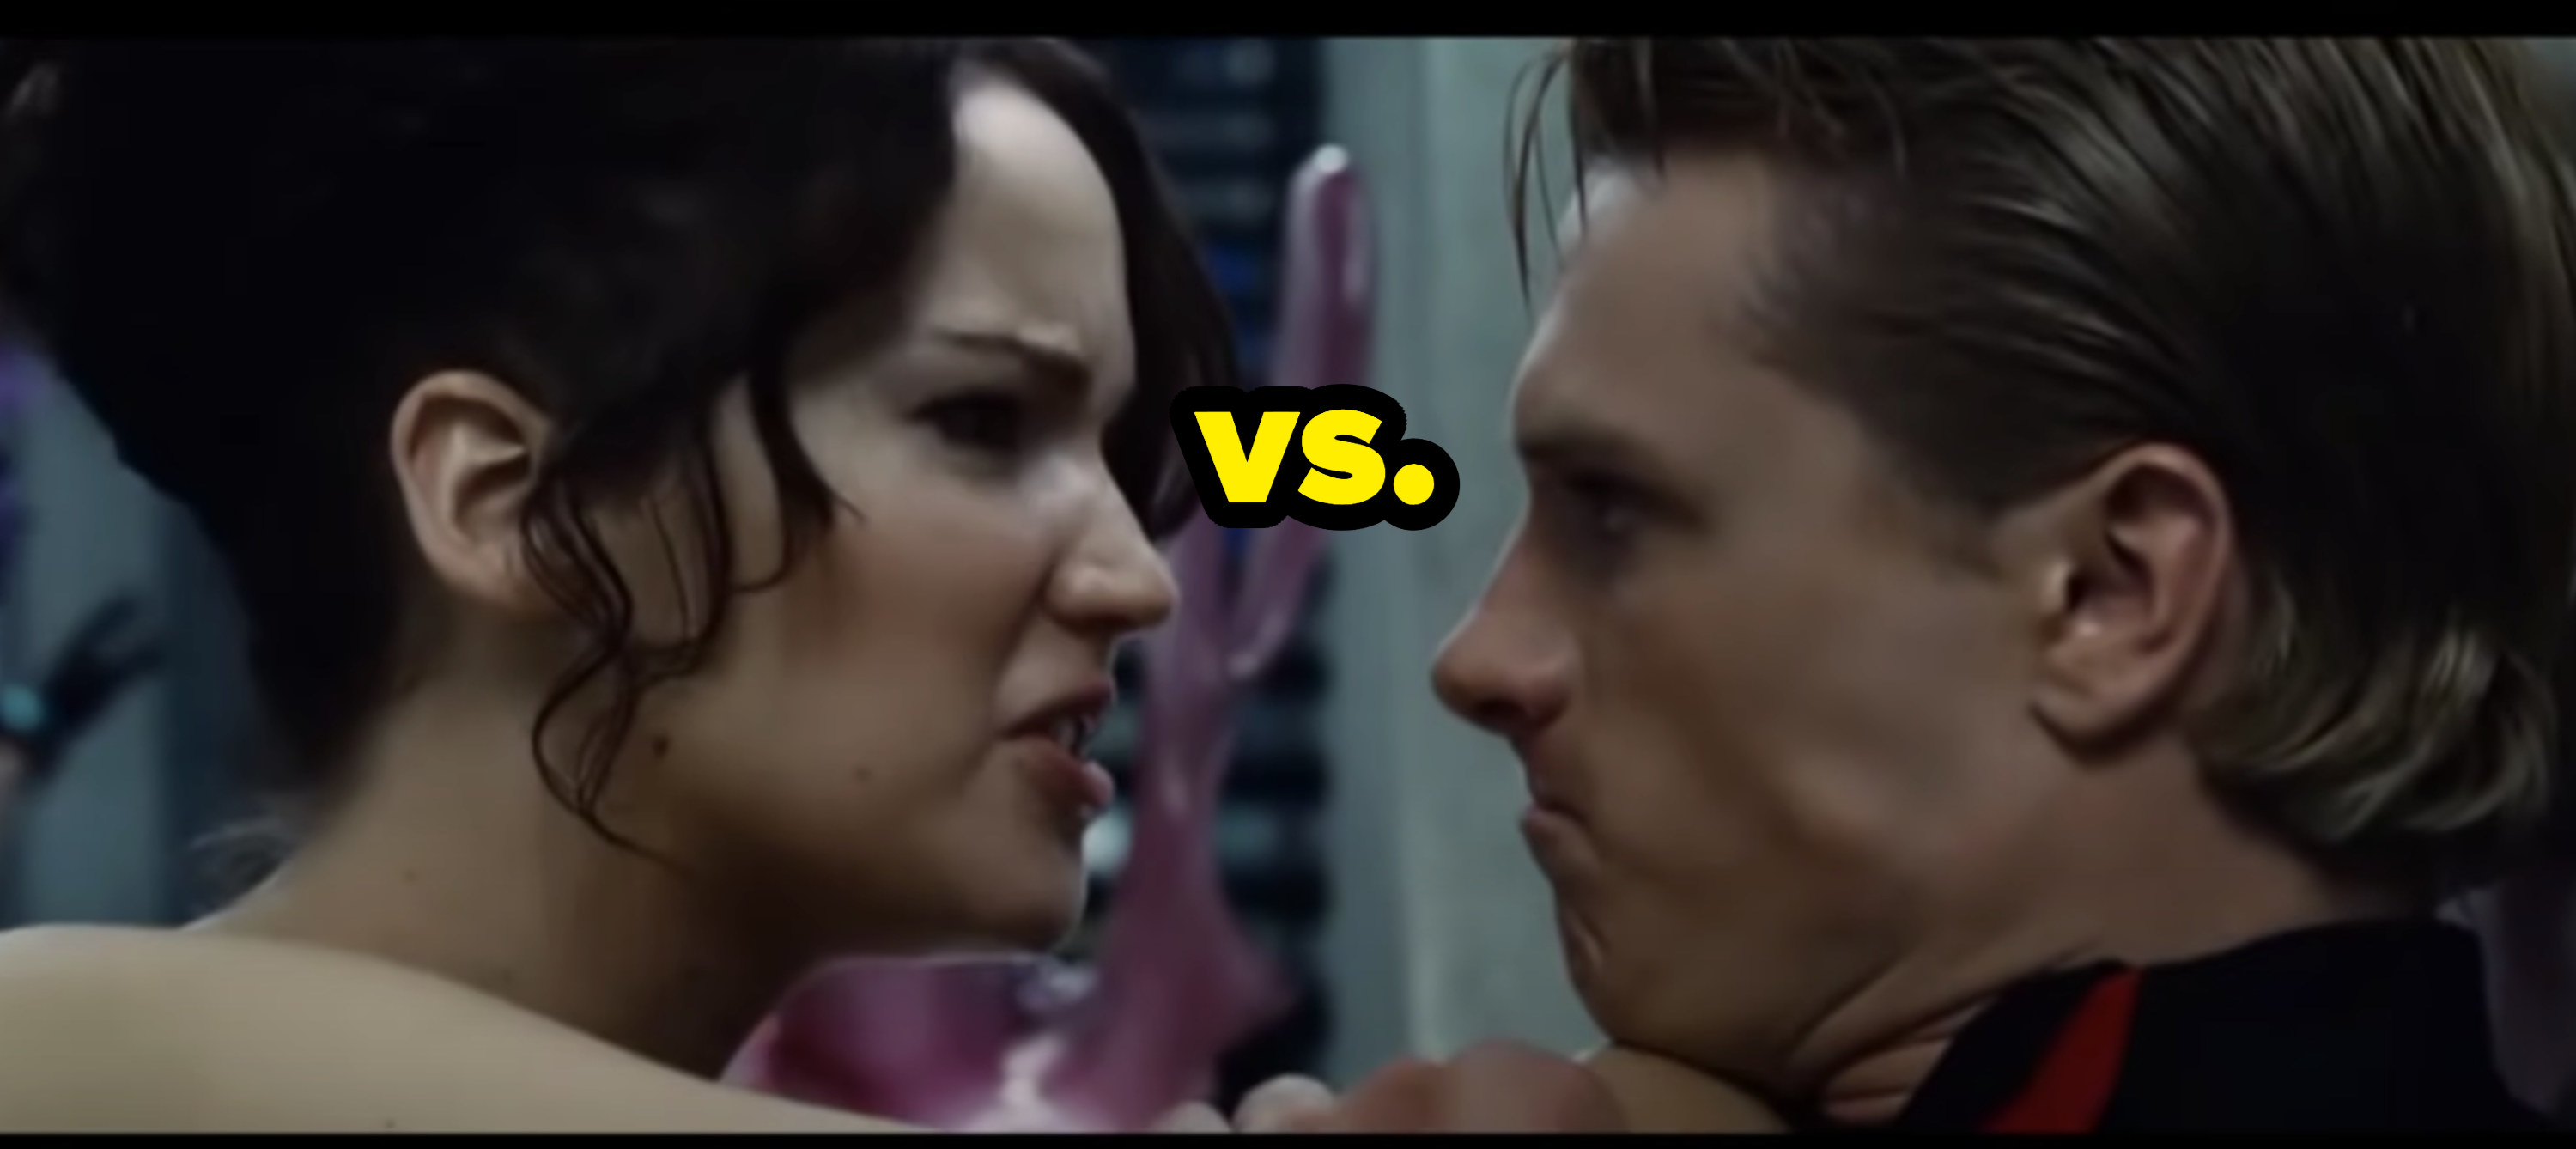 Katniss angrily pushing Peeta up against the wall with her elbow in his neck with the caption &quot;vs.&quot;